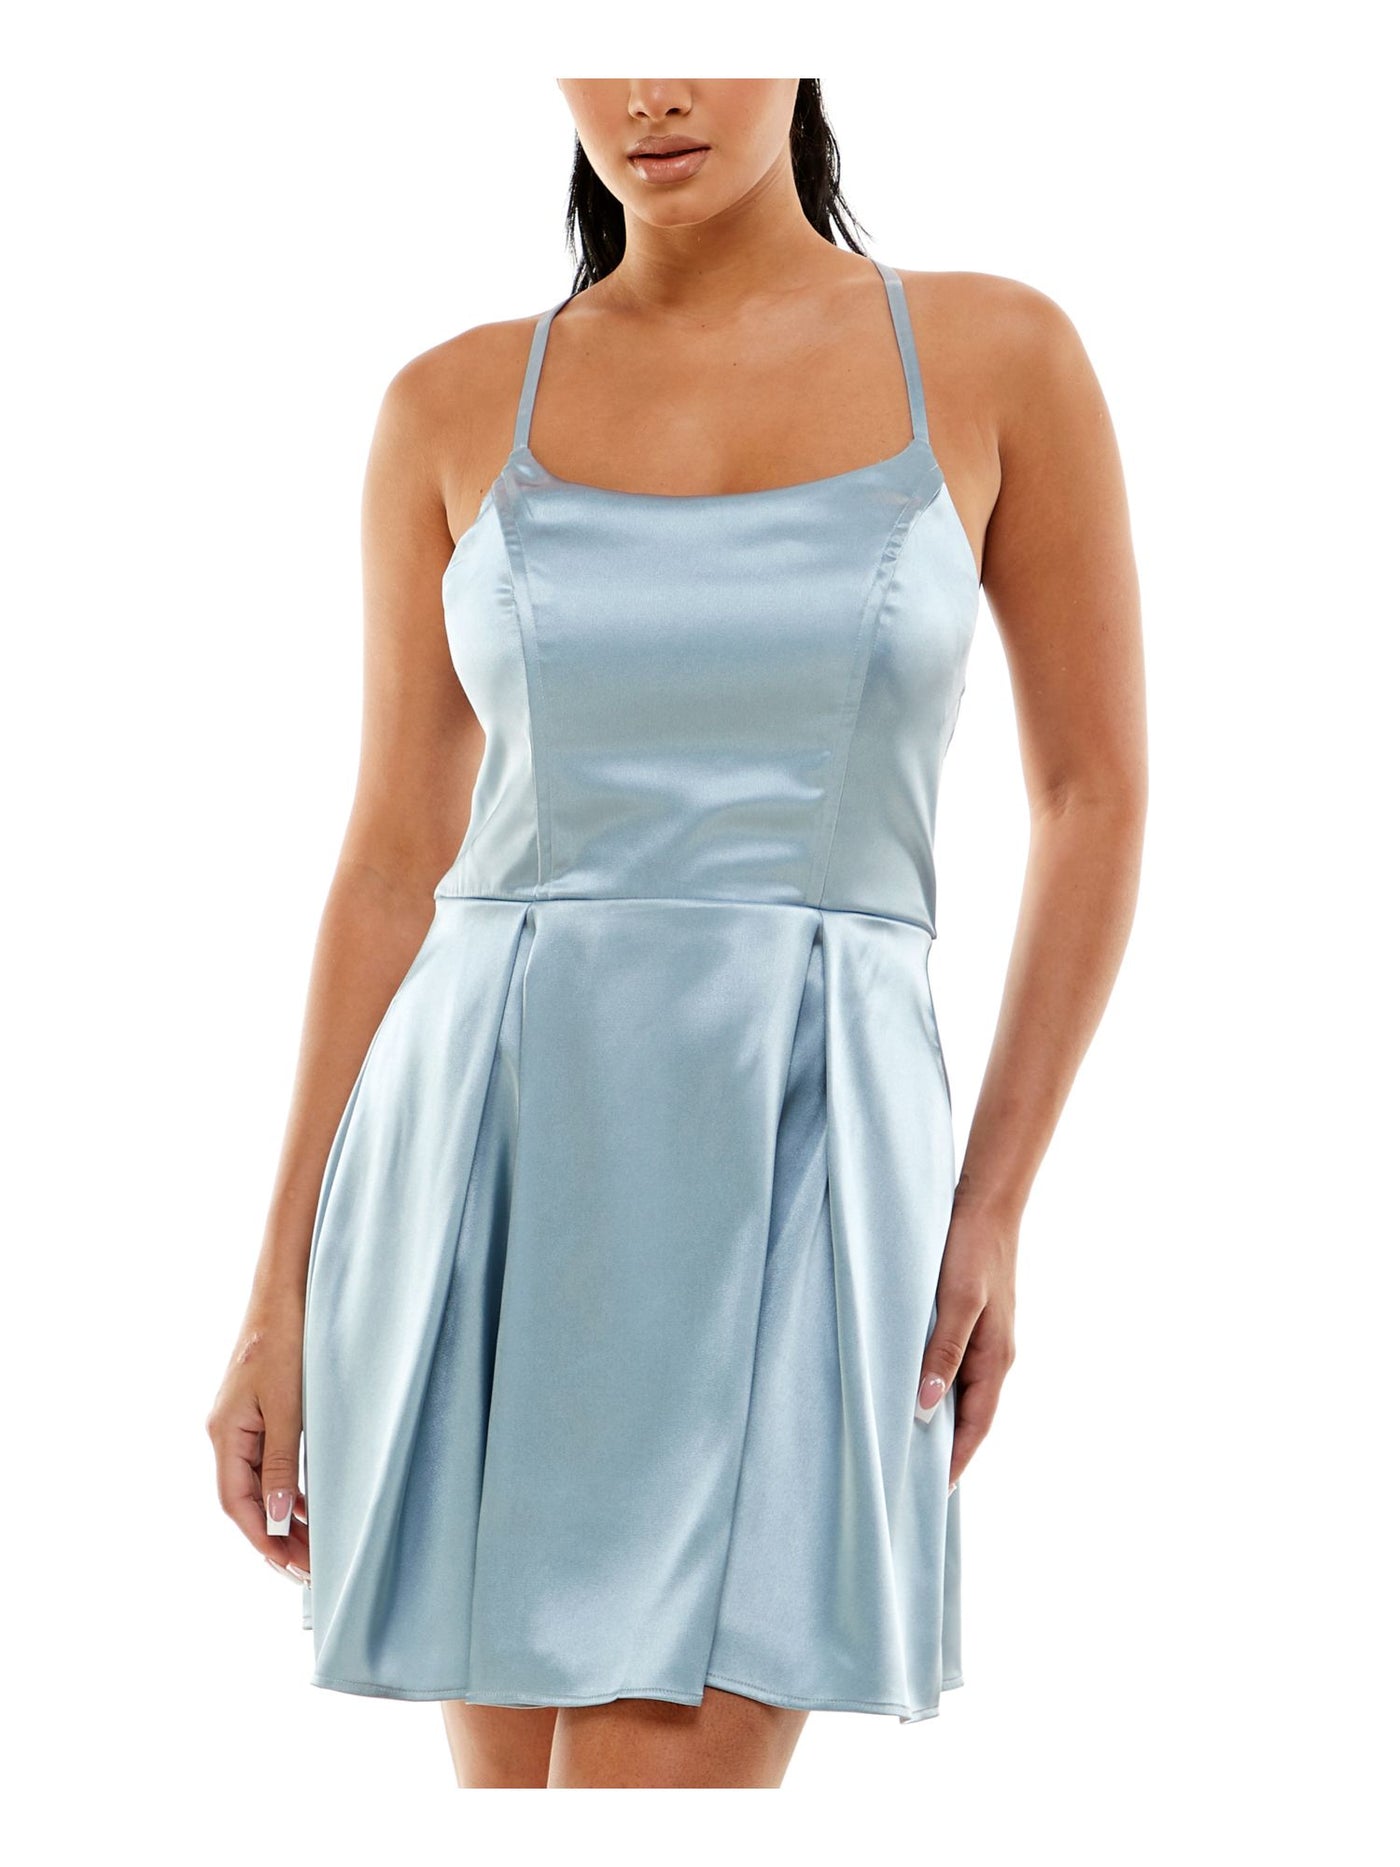 SPEECHLESS Womens Light Blue Stretch Zippered Pleated Strappy-back Satin Tie Spaghetti Strap Scoop Neck Mini Party Fit + Flare Dress Juniors 7